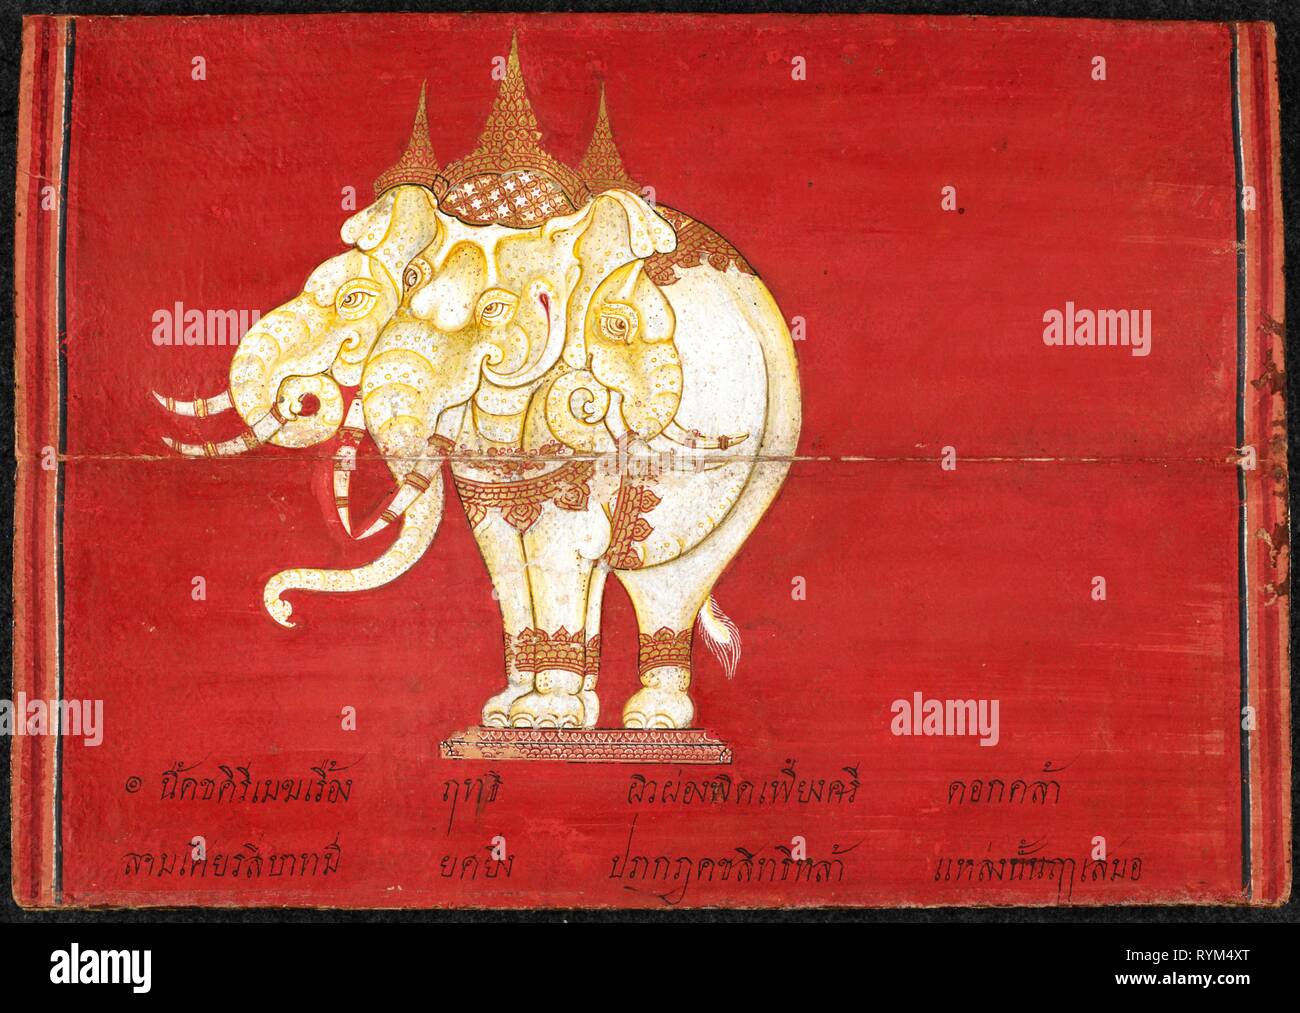 A three-headed elephant. Elephant treatise, painting on folded paper, script in ink with text and illustrations of elephant divinities and natural elephants. c.1830. Source: Or. 13652, f.8. Language: Thai. Stock Photo